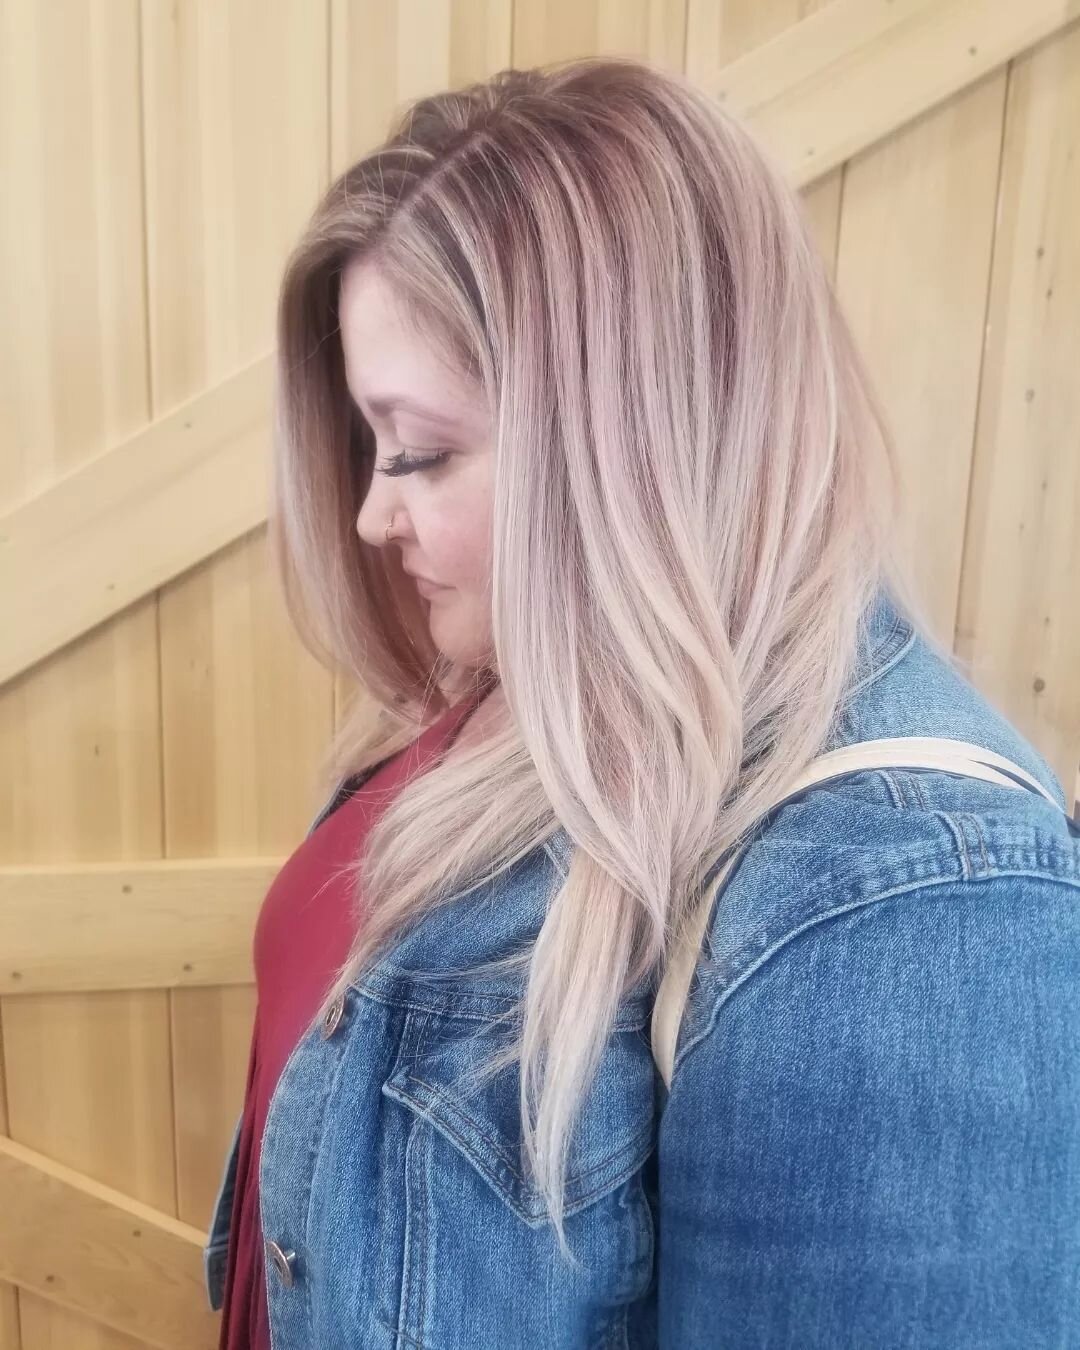 From the Copper Queen to the blonde of her dreams! 😍 Lightening hair can be a challenge, but it can be a fun journey along the way. Who's next?! 

P.S. If you know this girl, she is always lookin' FABULOUS! Like this post if you LOVE her new look ❤️